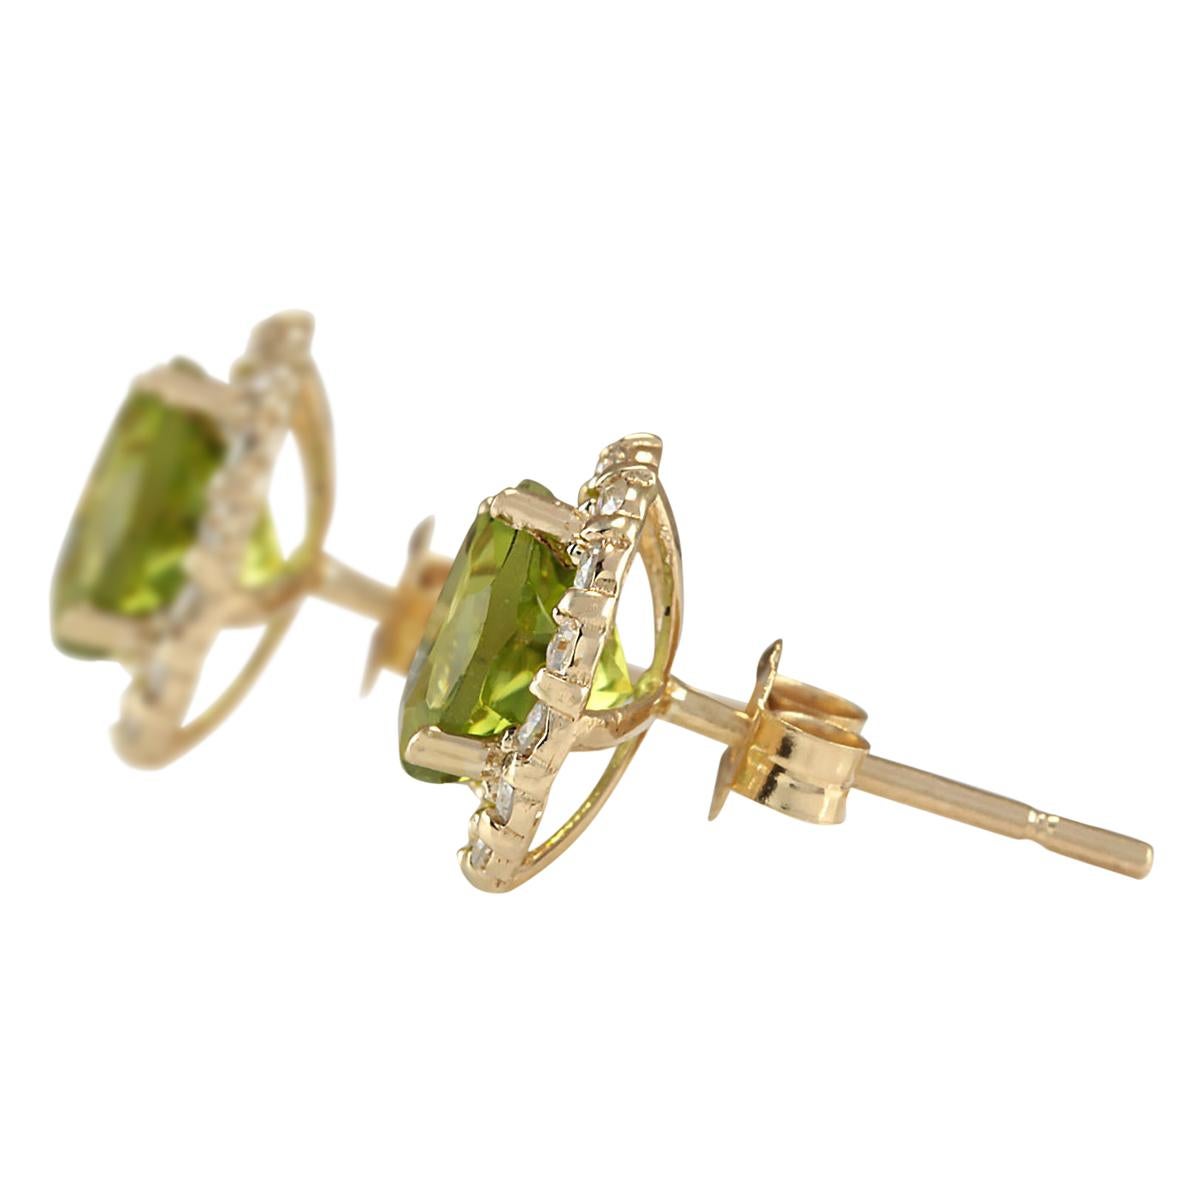 Stamped: 14K Yellow Gold
Total Earrings Weight: 2.0 Grams
Total Natural Peridot Weight is 3.00 Carat (Measures: 7.00x7.00 mm)
Total Natural Diamond Weight is 0.65 Carat
Color: F-G, Clarity: VS2-SI1
Face Measures: 10.50x10.50 mm
Sku: [703347W]